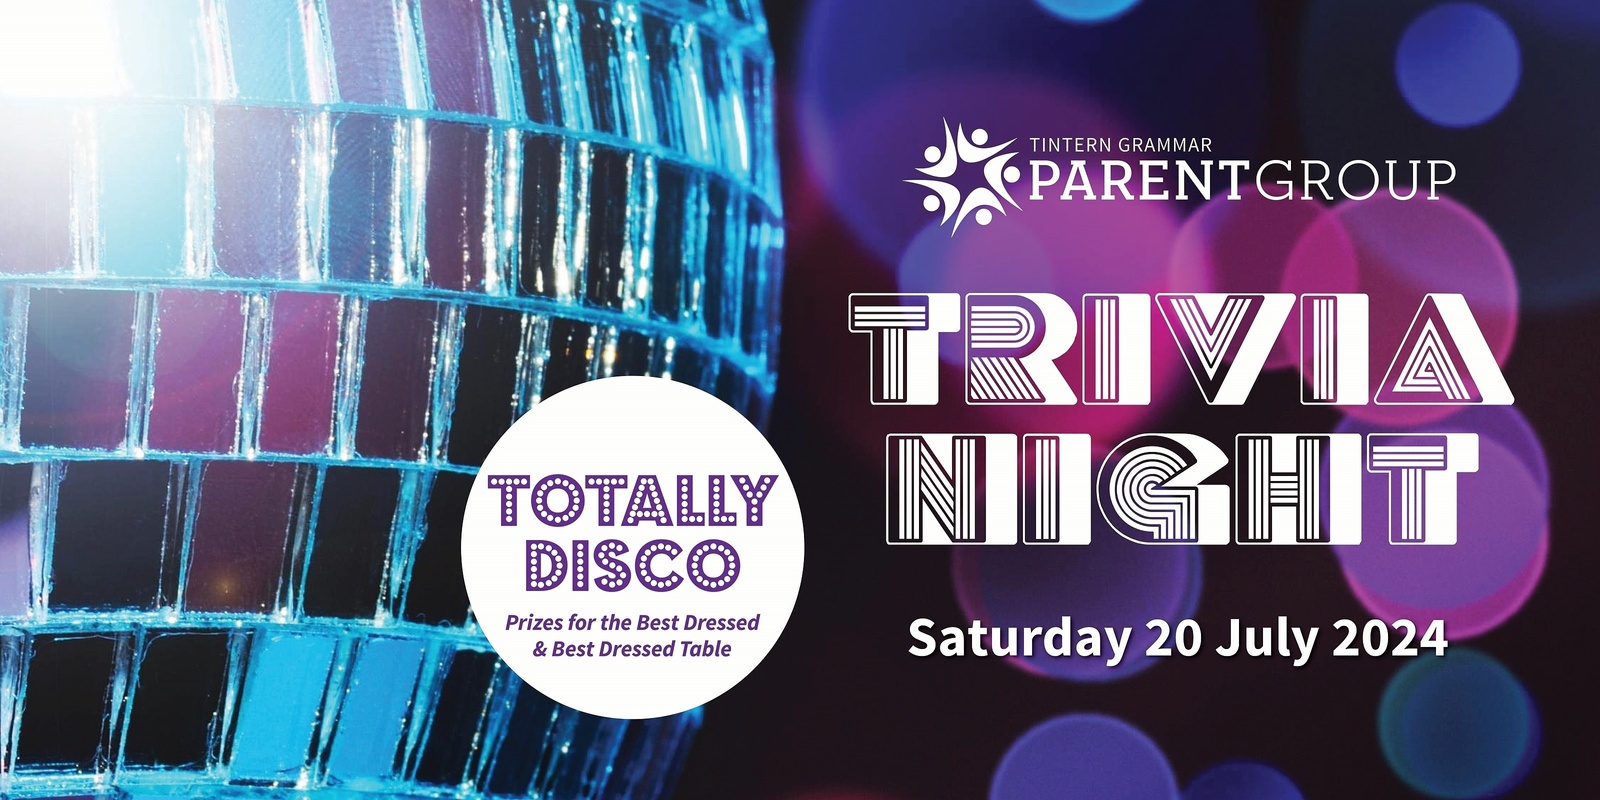 Banner image for Tintern Parent Group Trivia Night 2024